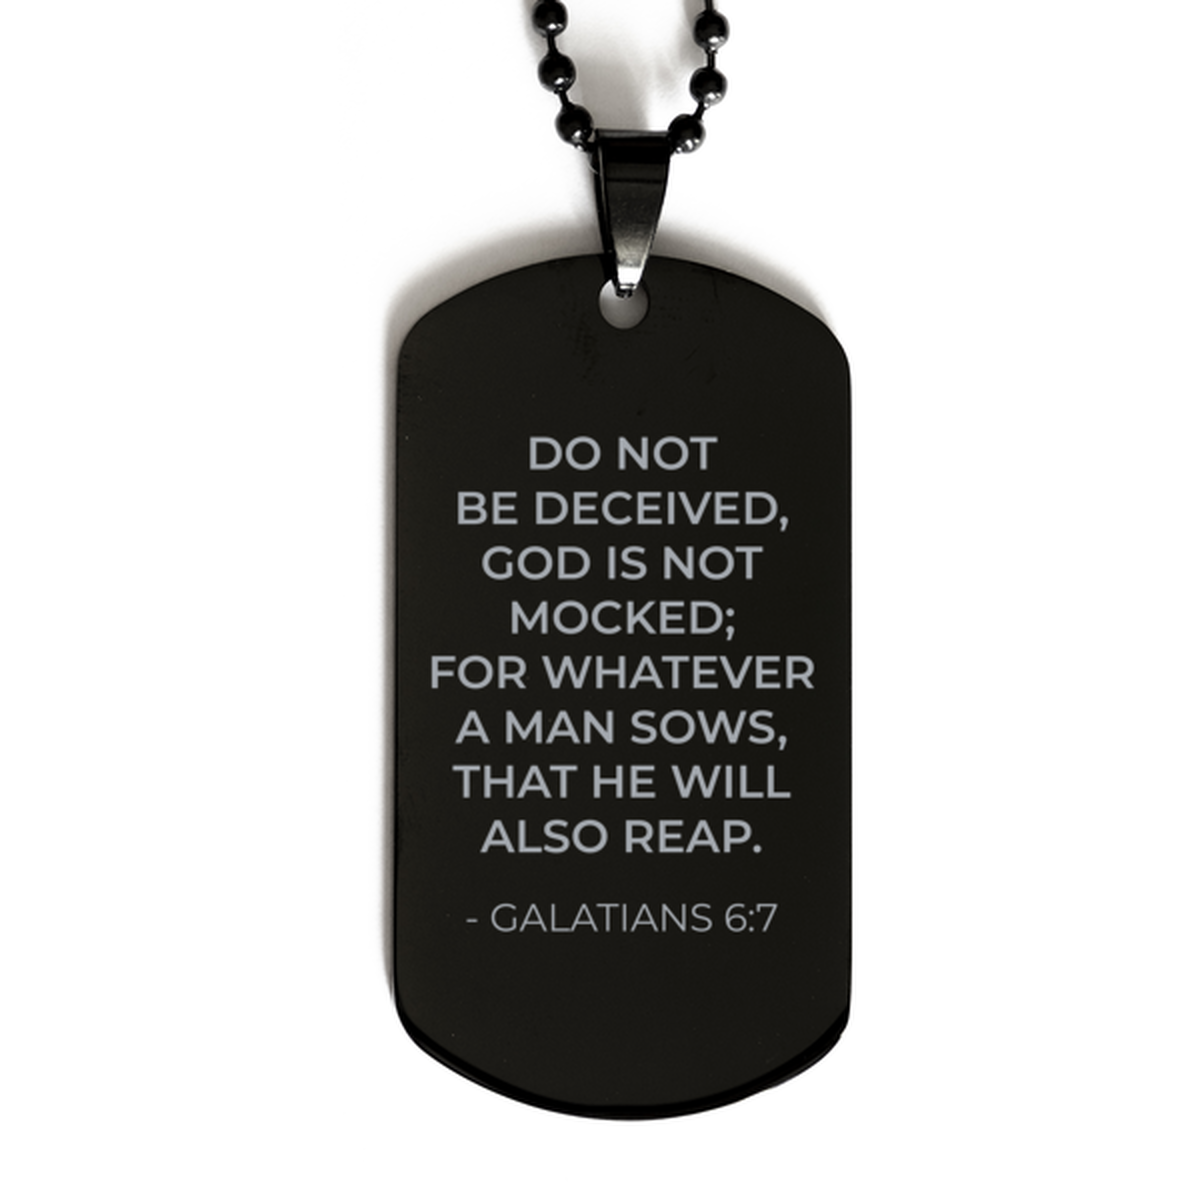 Bible Verse Black Dog Tag, Galatians 6:7 Do Not Be Deceived, God Is Not Mocked; For, Christian Inspirational Necklace Gifts For Men Women